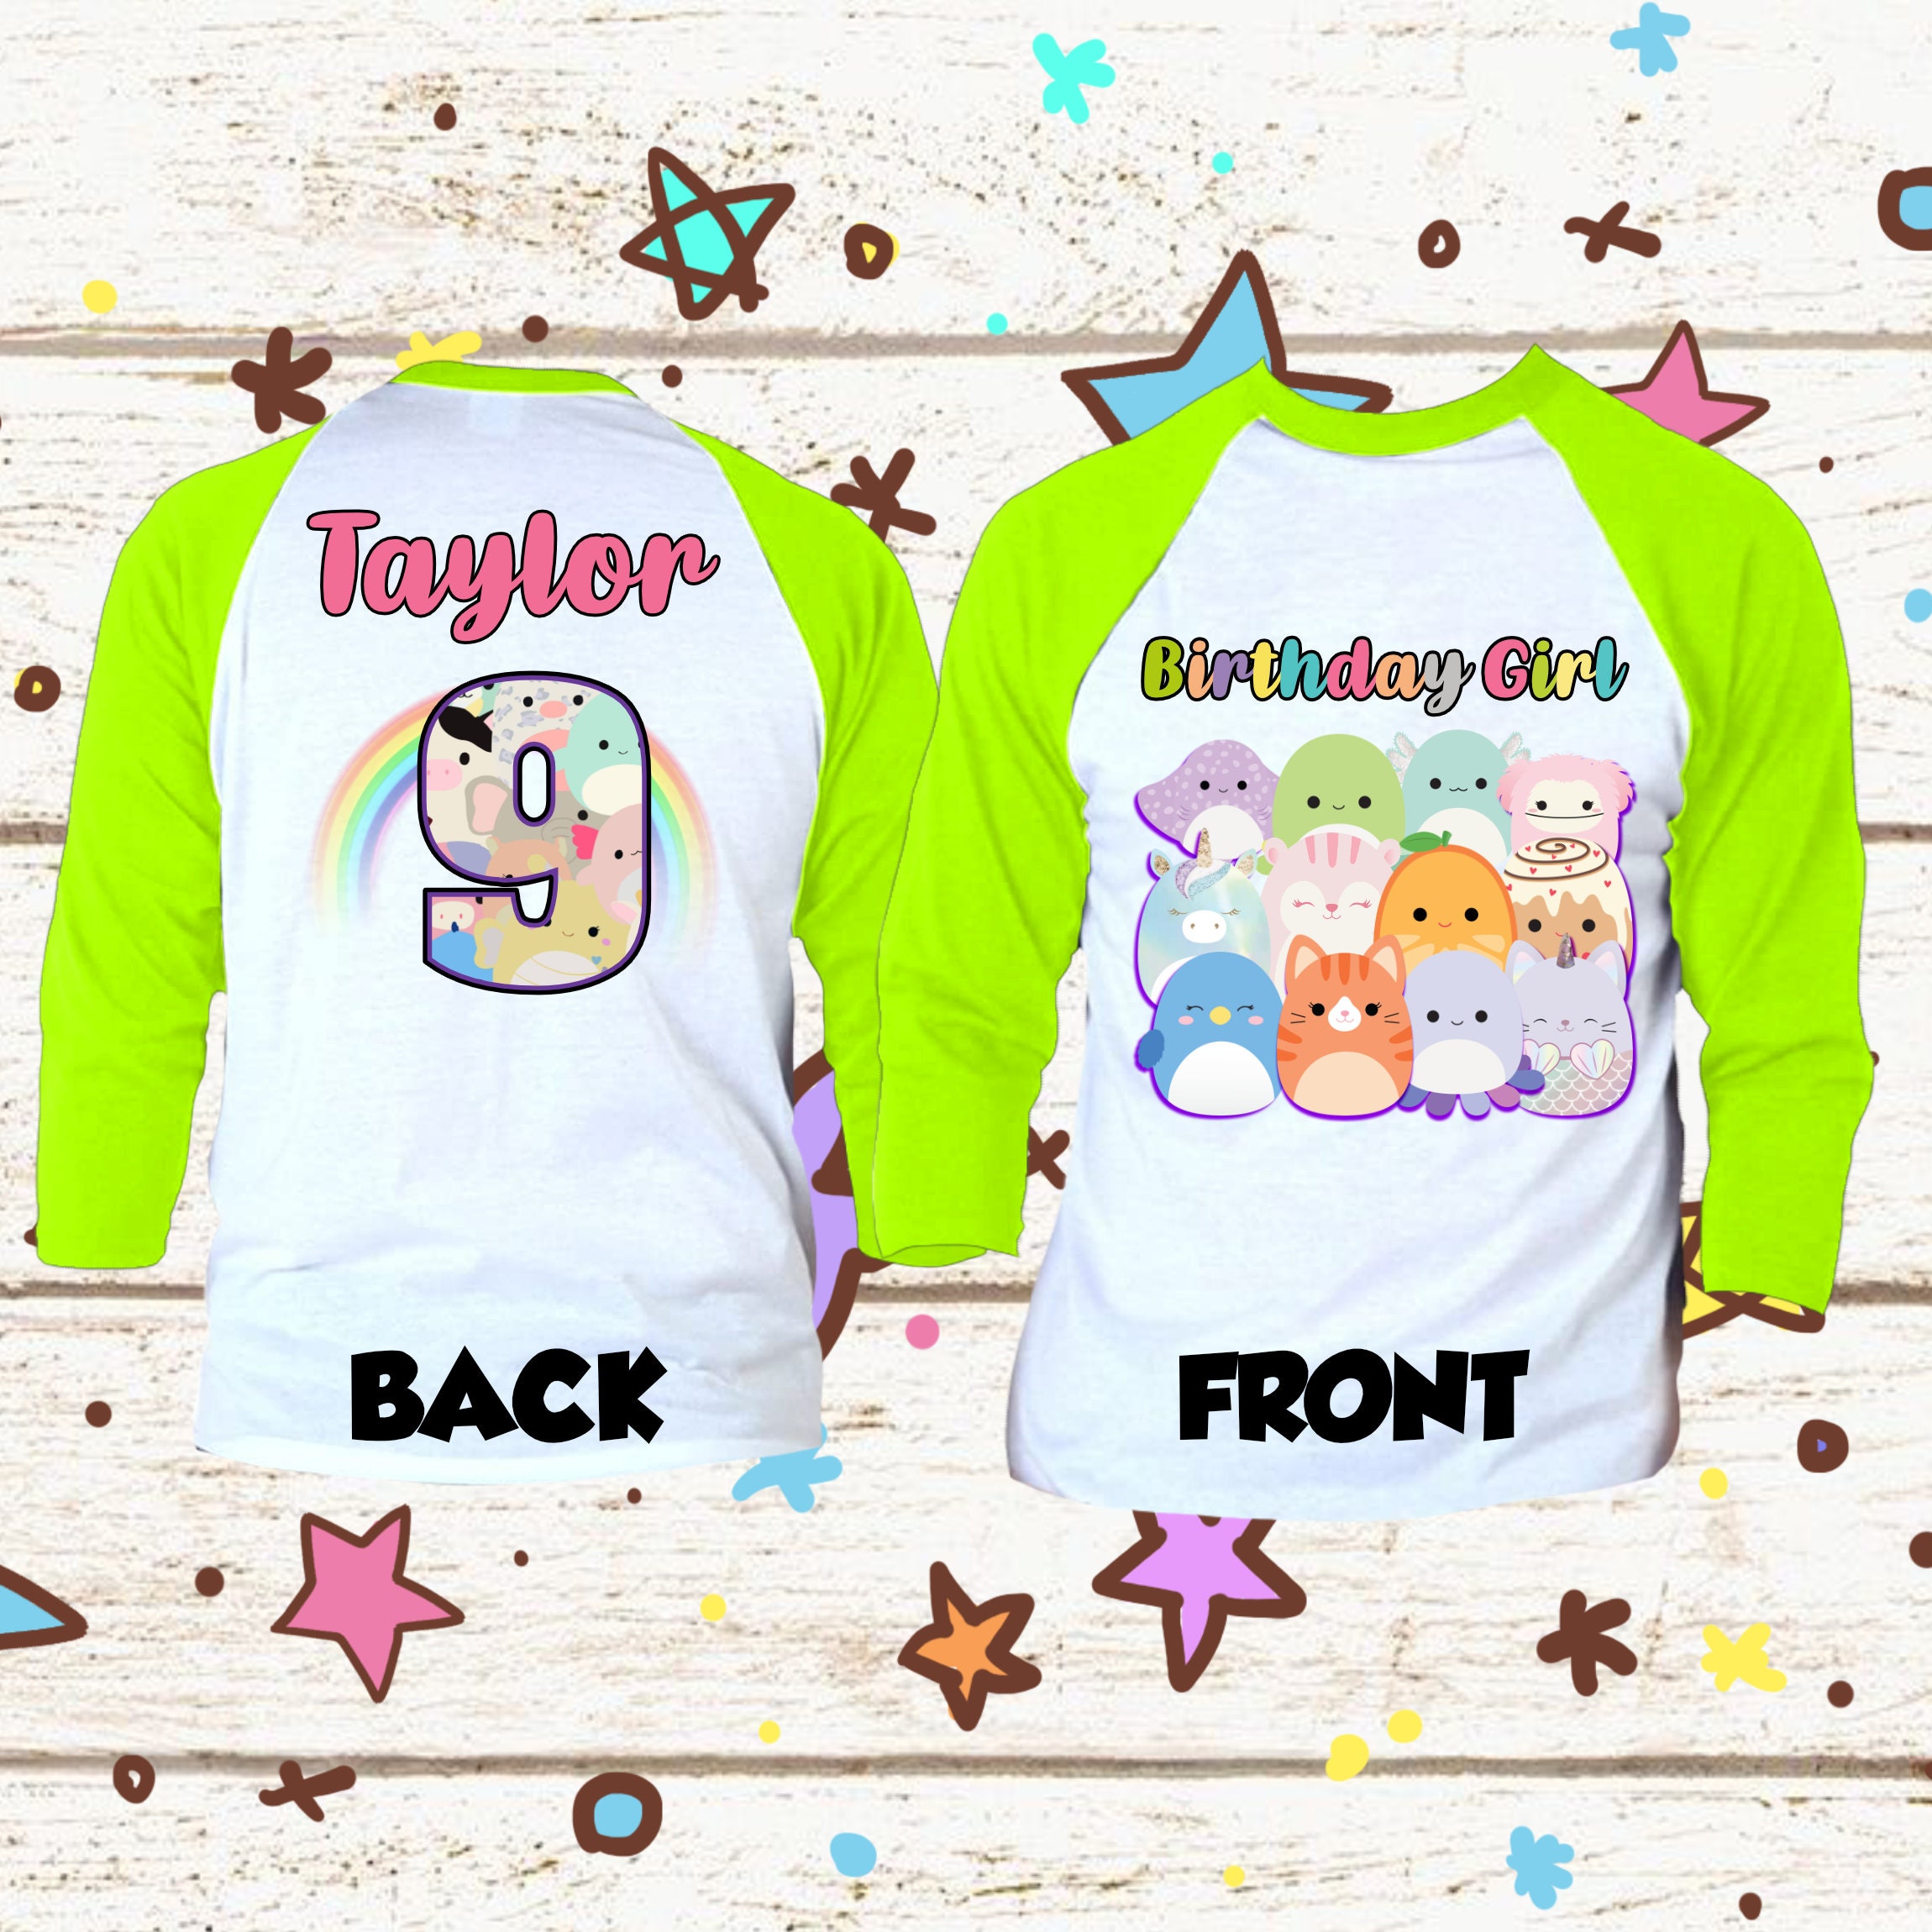 Discover Squishmallows Birthday Girl Party Shirt - Squishmallow Squishy, Squish Mallow Lover Gift Shirt Party theme - Family shirt - matching set